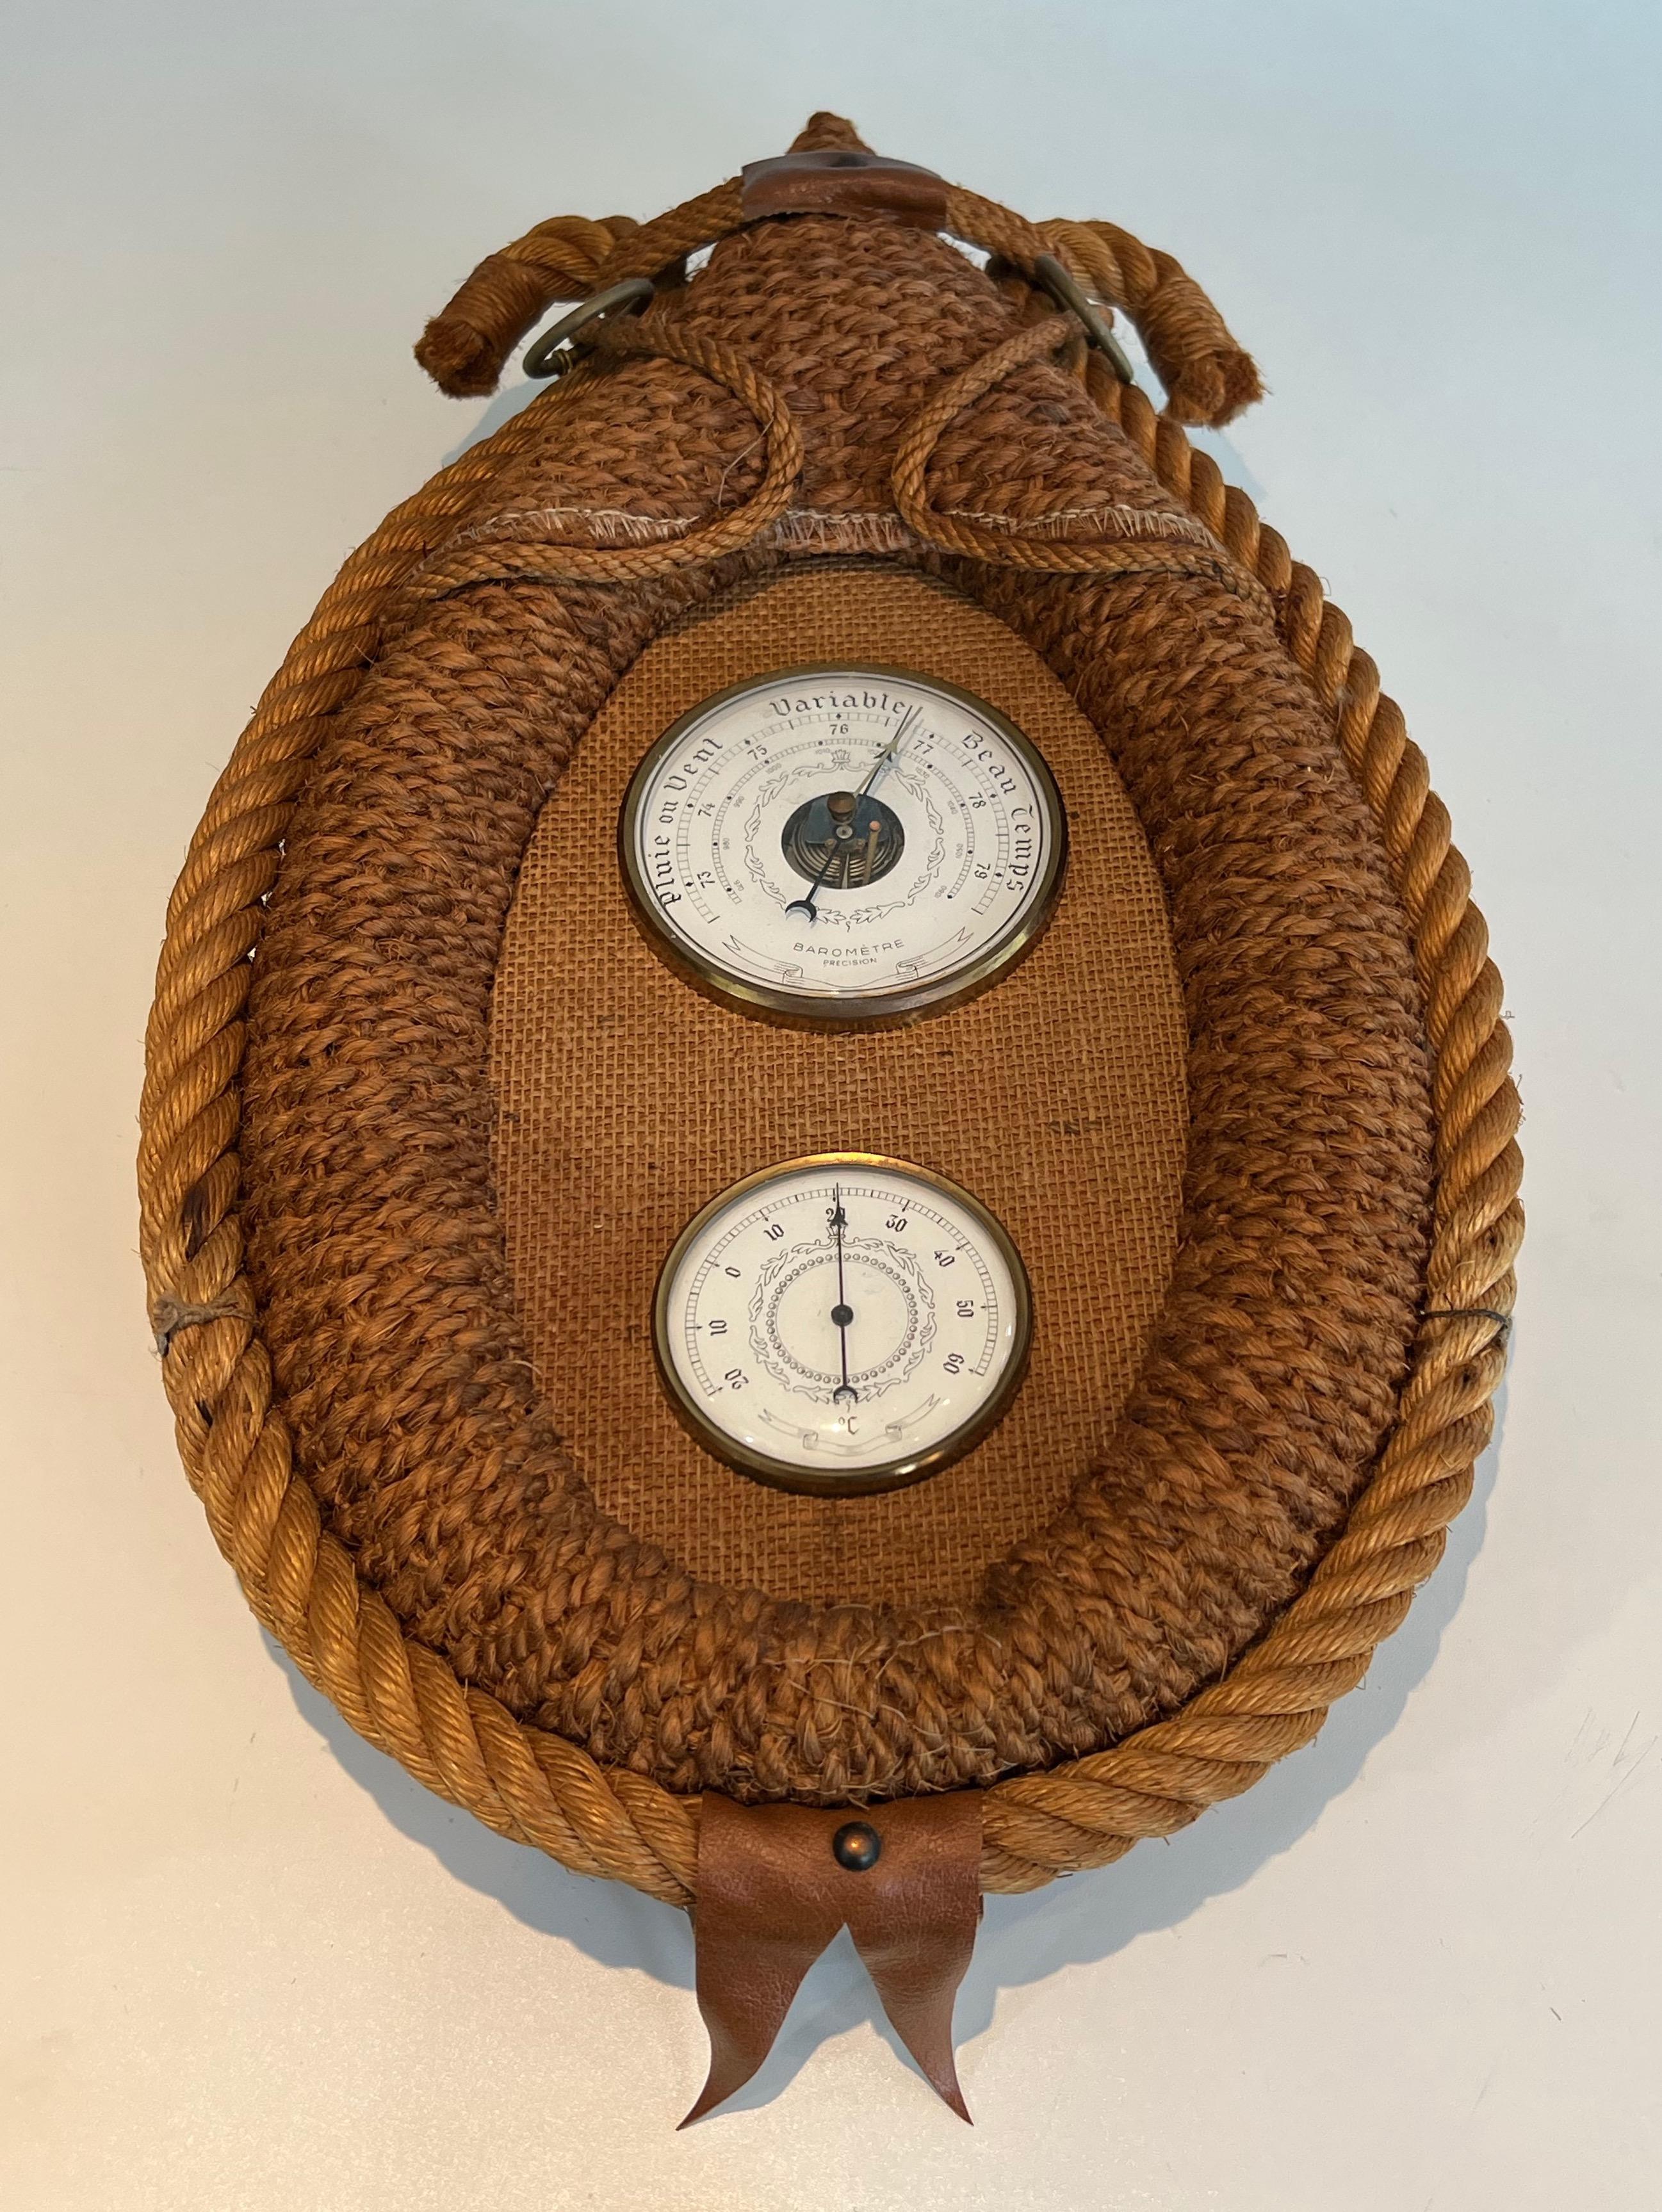 This very unusual barometer is made of rope. This is a French work by Adrien Audoux & Frida Minet. circa 1950.